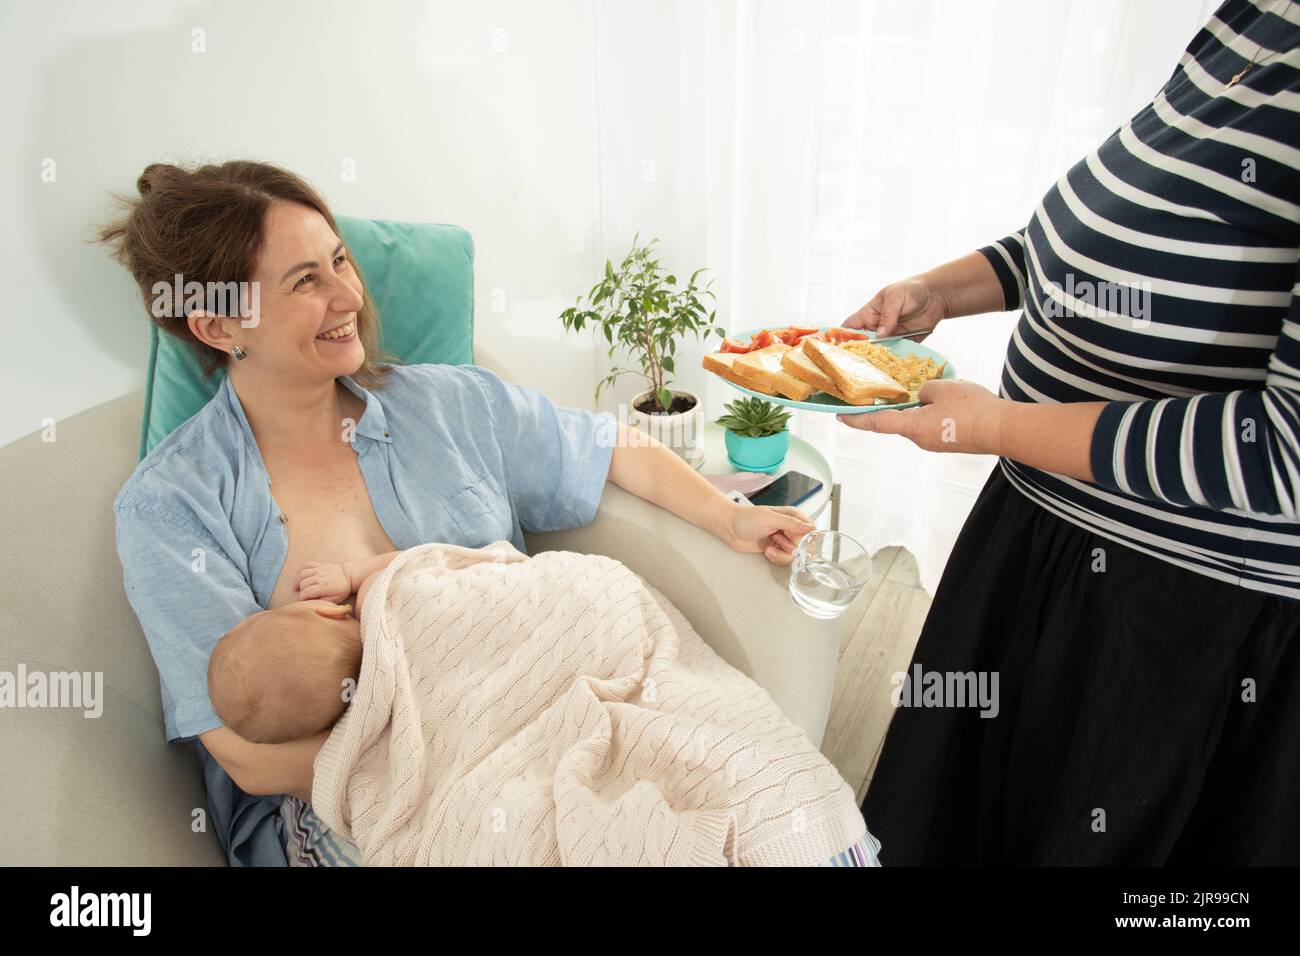 Elder woman helps to eat for new mother when she breastfeeds her baby. Motherhood support Stock Photo